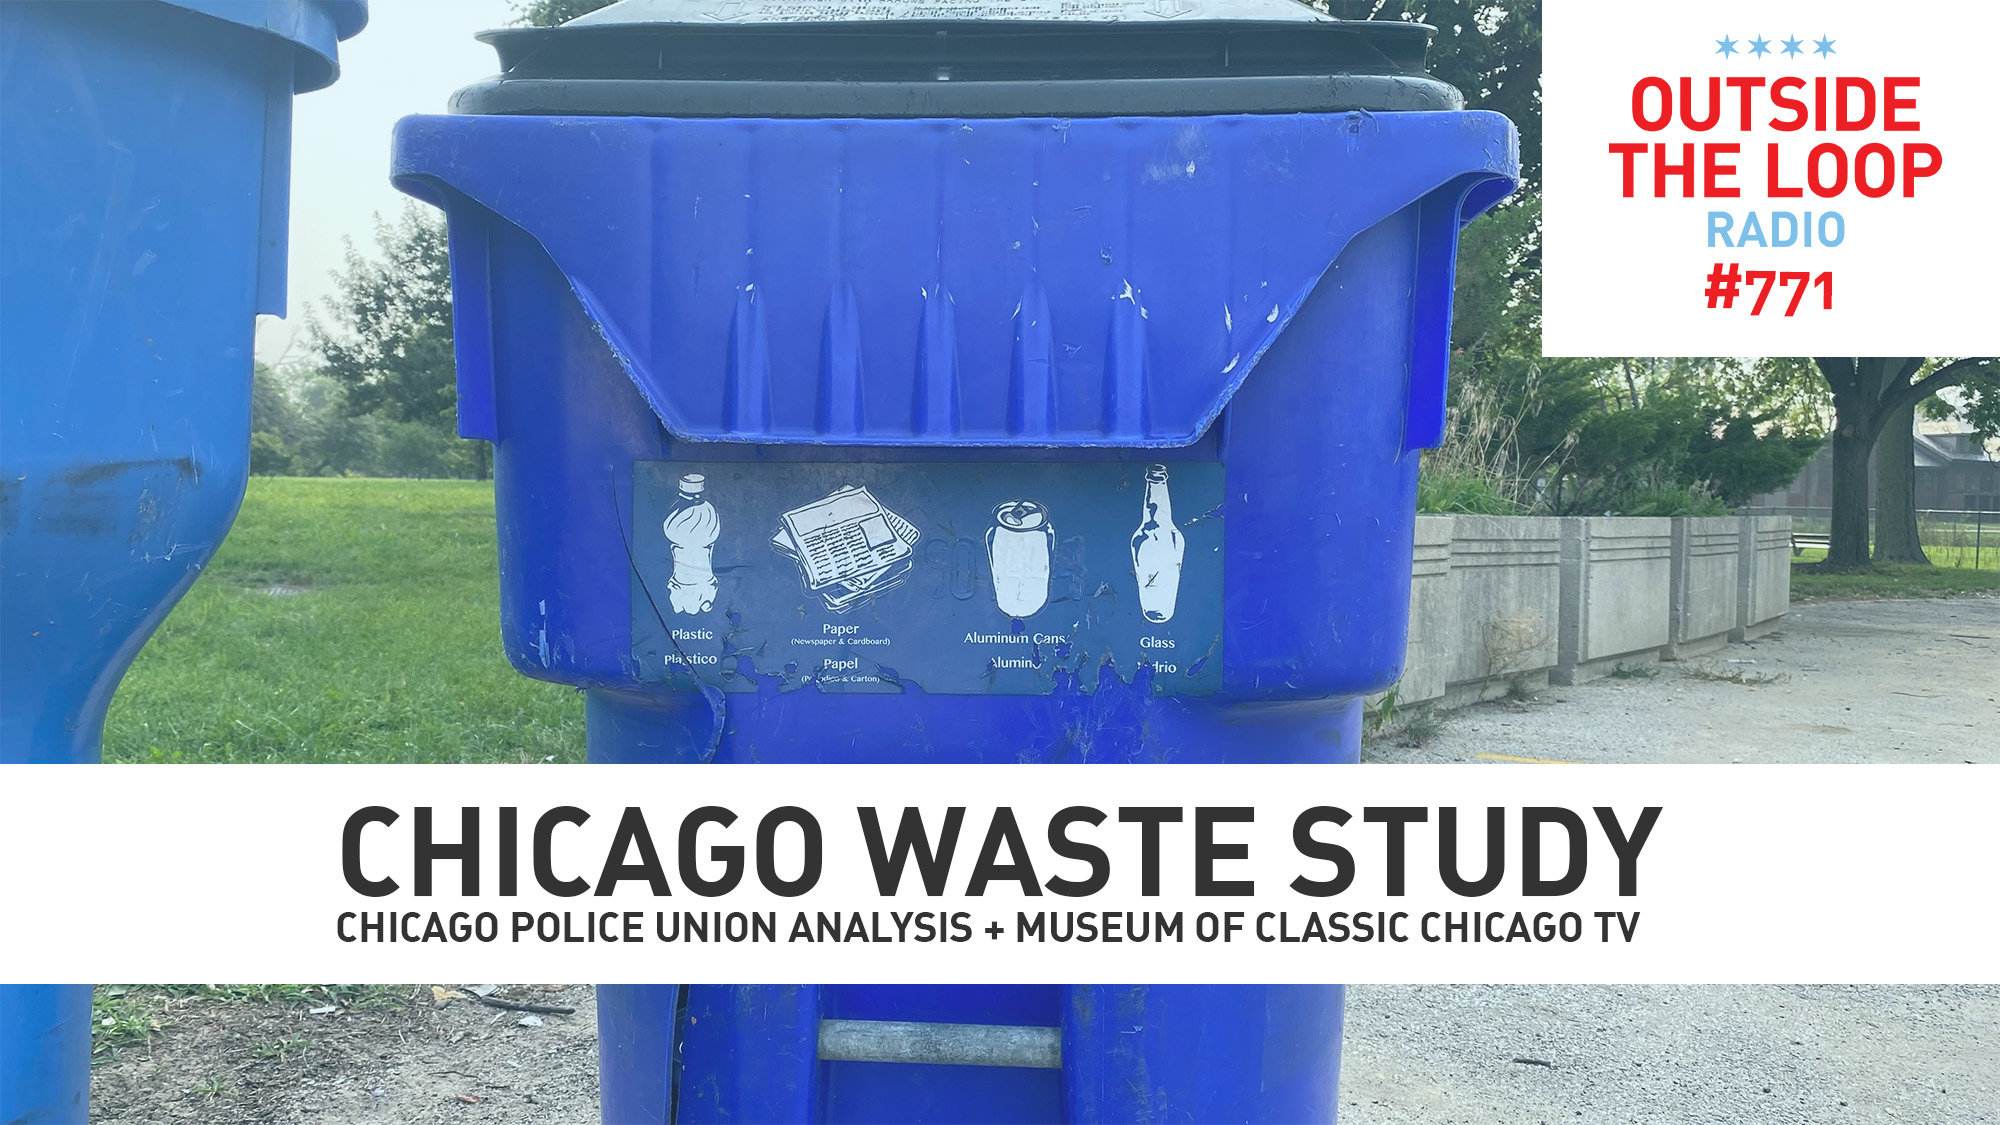 How can Chicago improve its handling of waste? (Photo credit: Mike Stephen/WGN Radio)